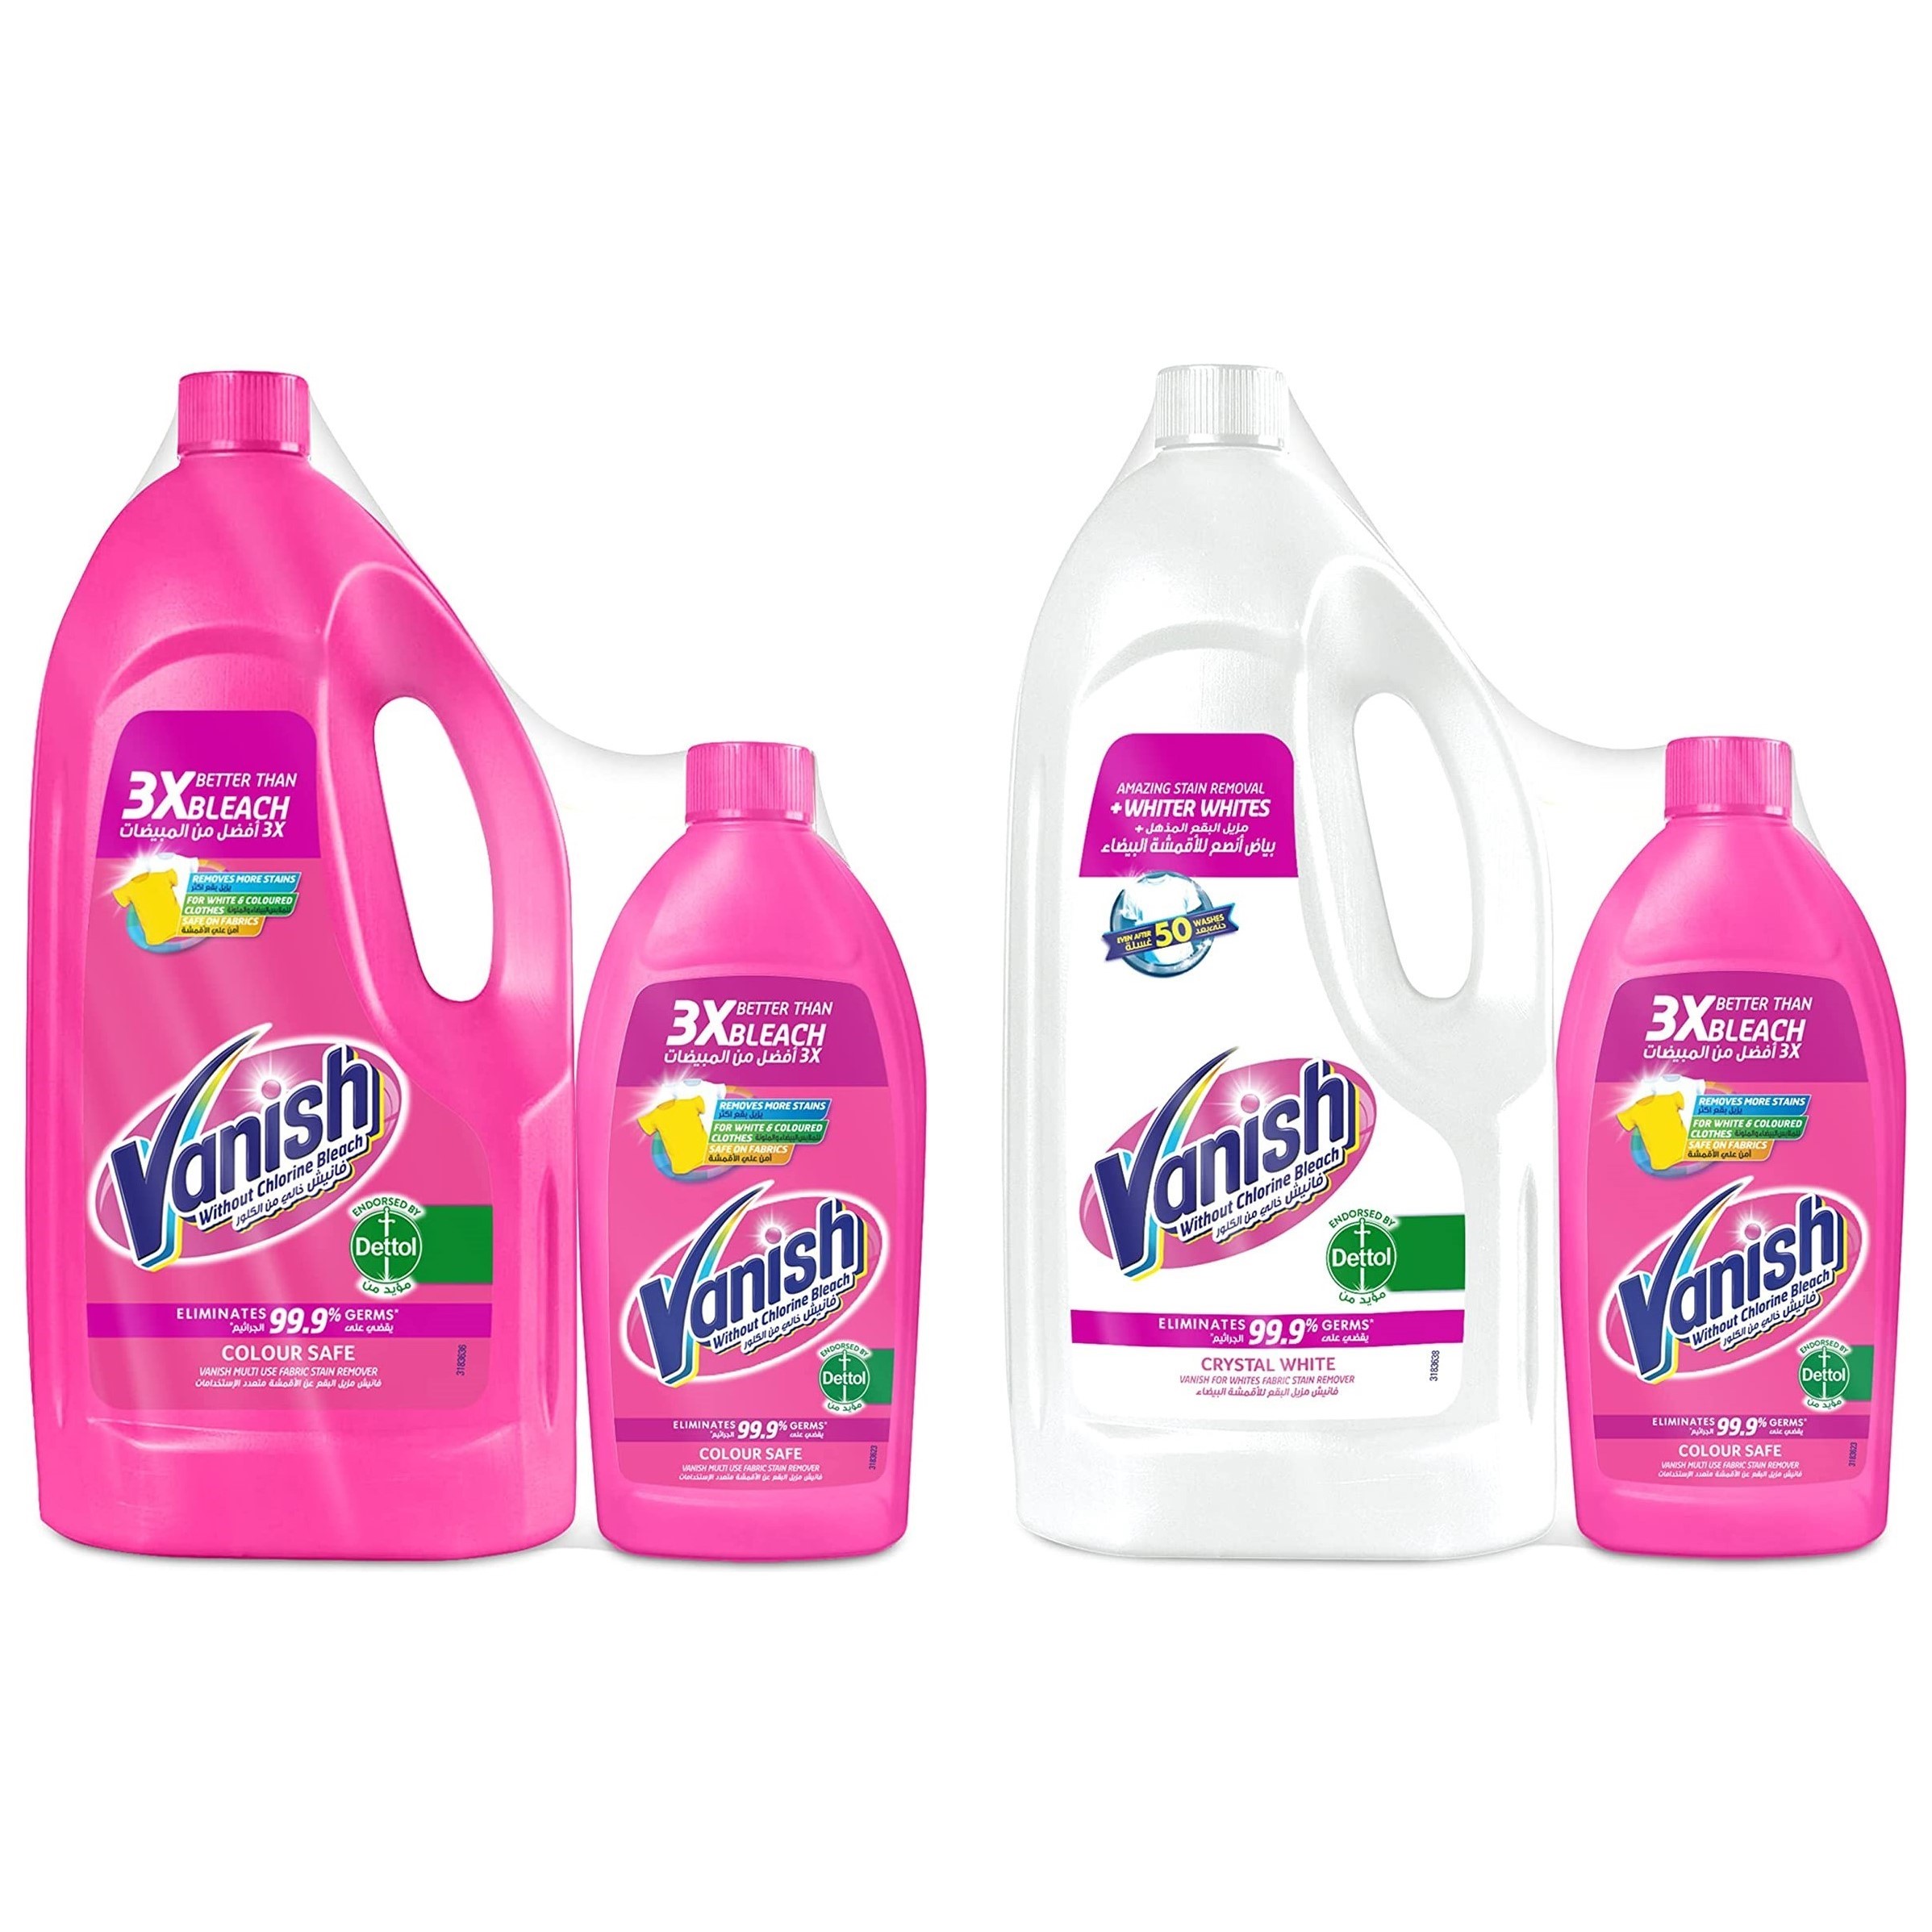 Vanish Laundry Stain Remover Liquid For White Clothes 1.8L +